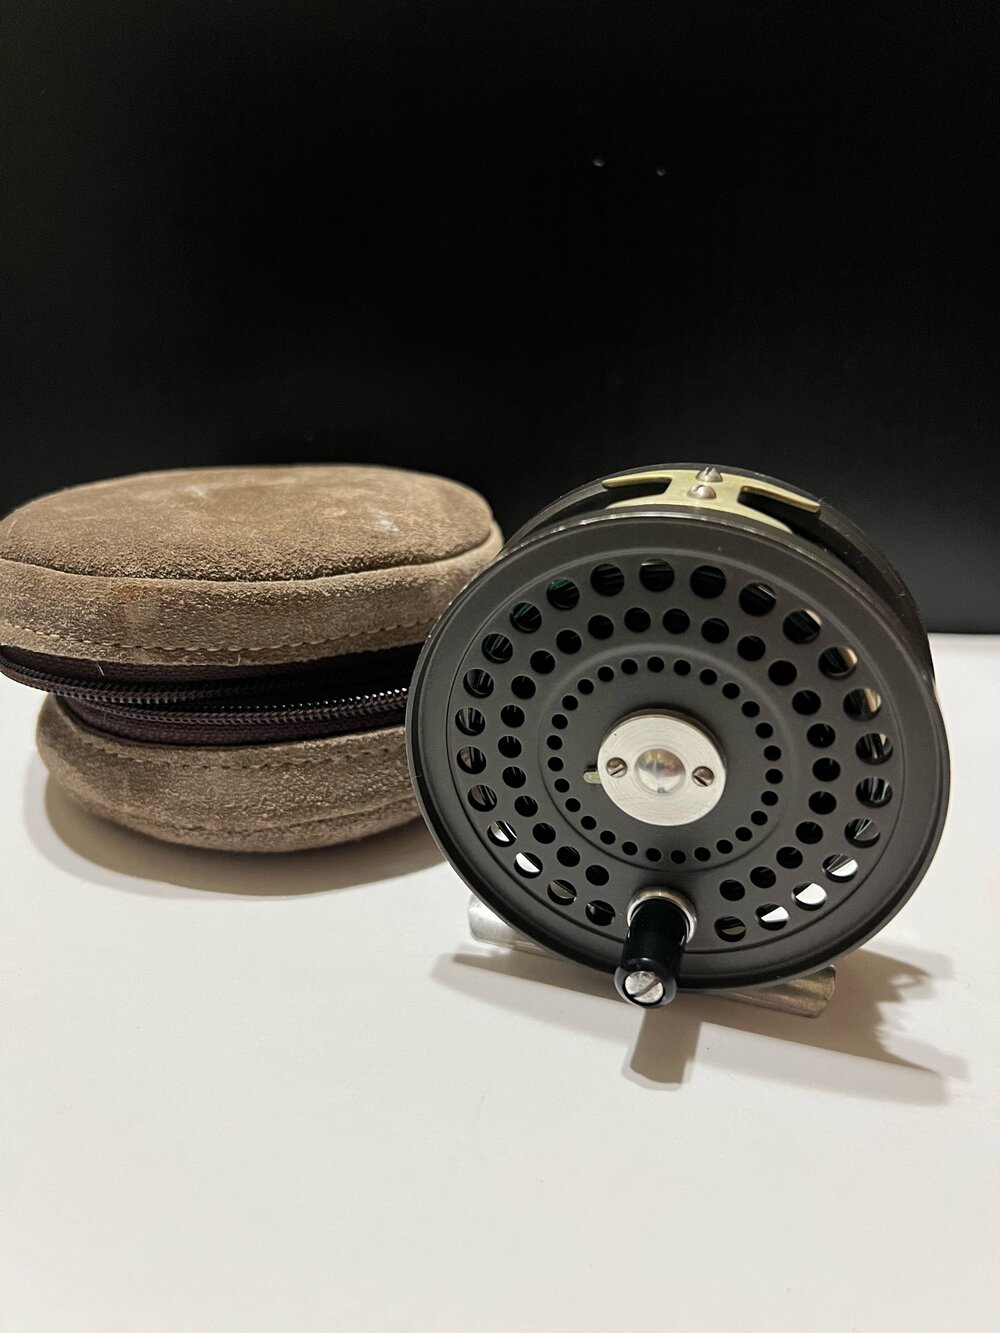 Orvis CFO III Fly Reel & Extra Spool with Case Made In England by Hardy —  VINTAGE FISHING REELS